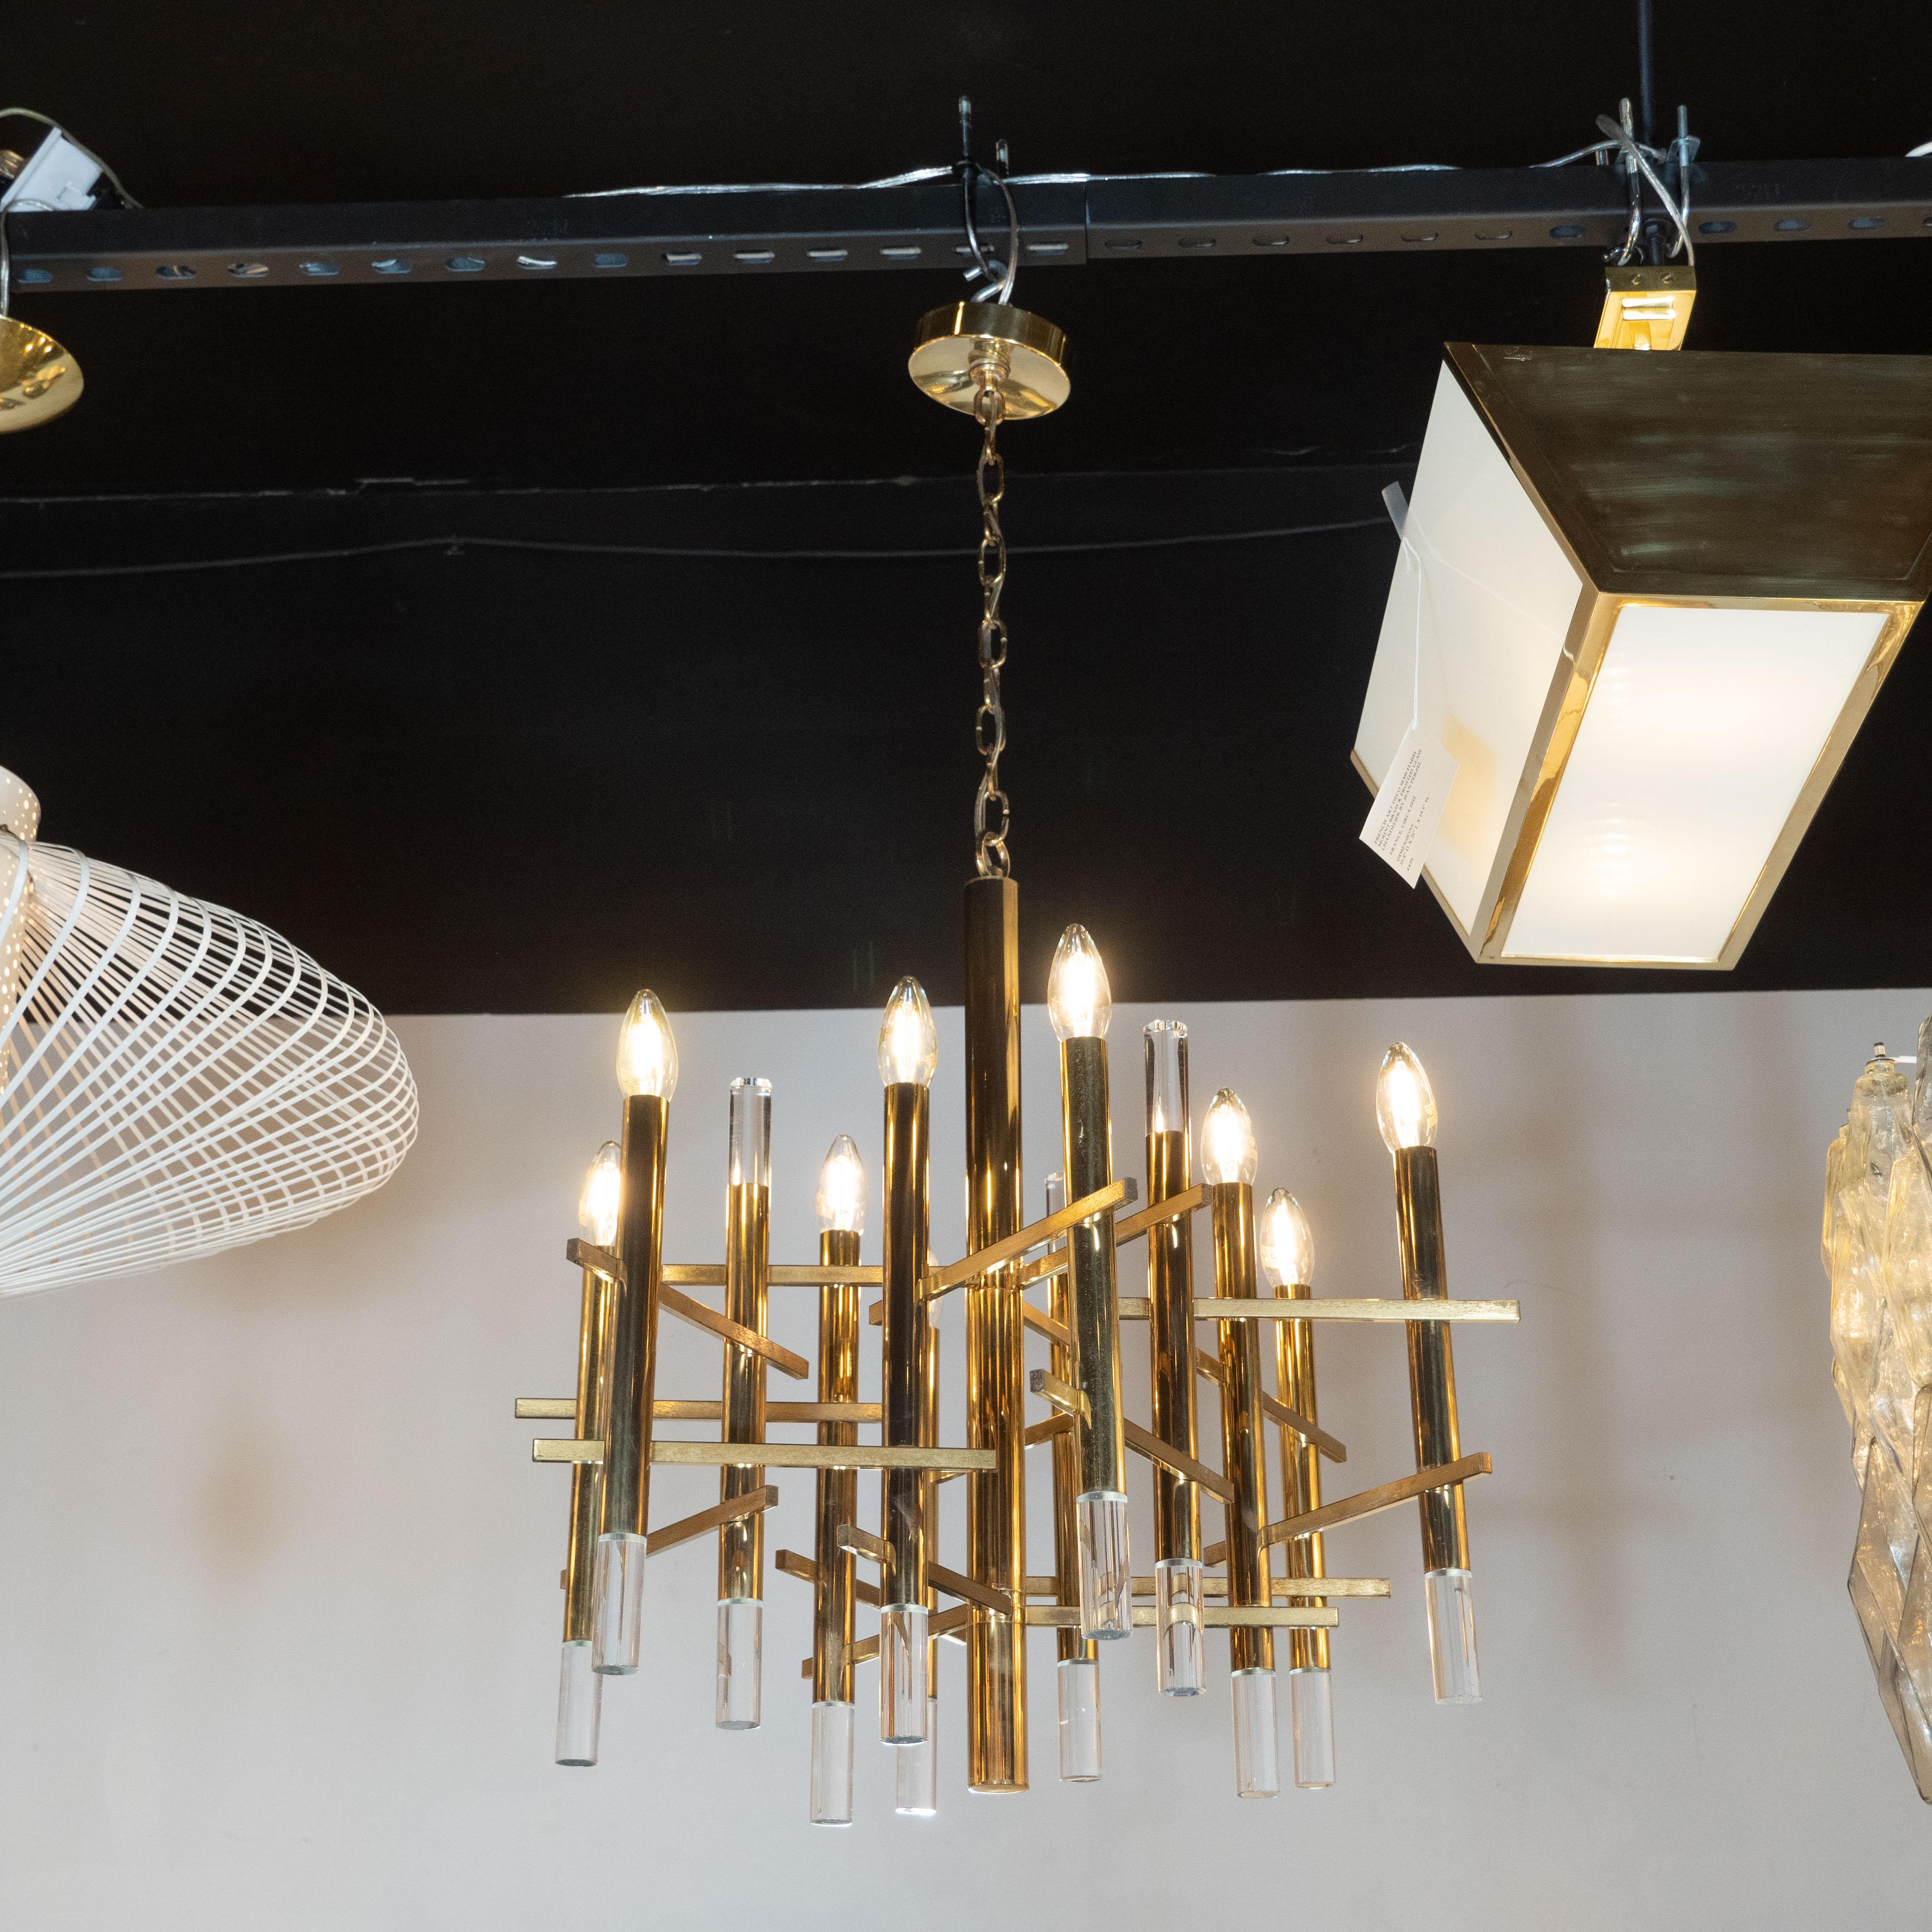 This refined rectilinear chandelier was realized by Gaetano Sciolari in Italy, circa 1970. It features a cylindrical body with six arms of the same form attached via rectangular slats to create a dynamic basket weave pattern in alternating segments